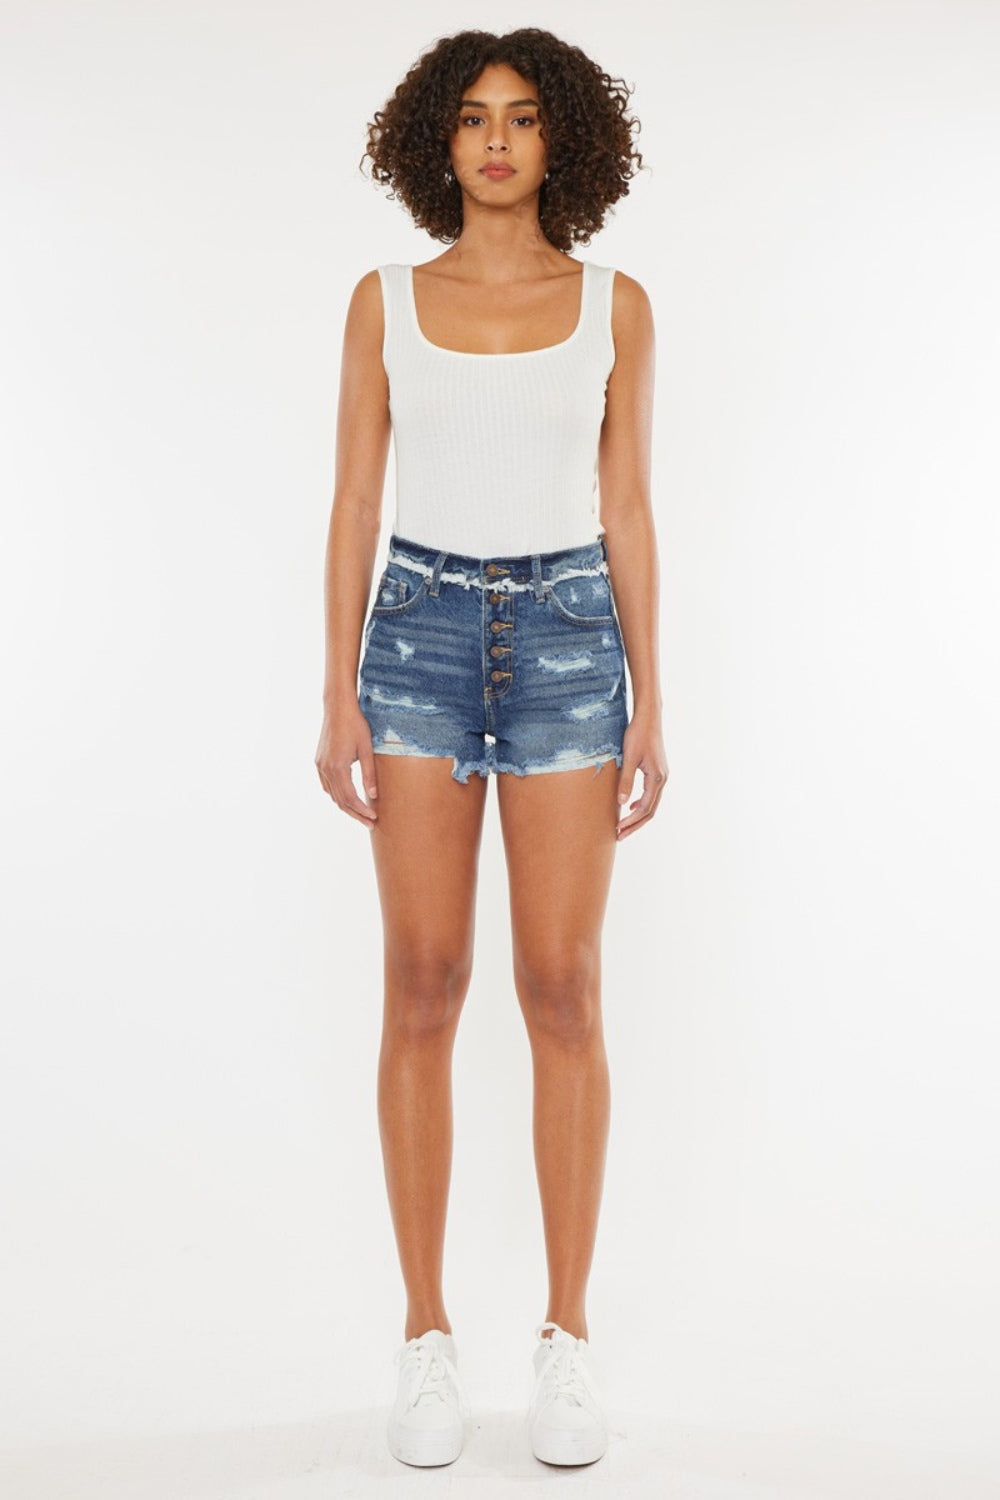 KanCan Button Fly High Rise Torn Distressed Denim Frayed Cut-Off Jean Shorts